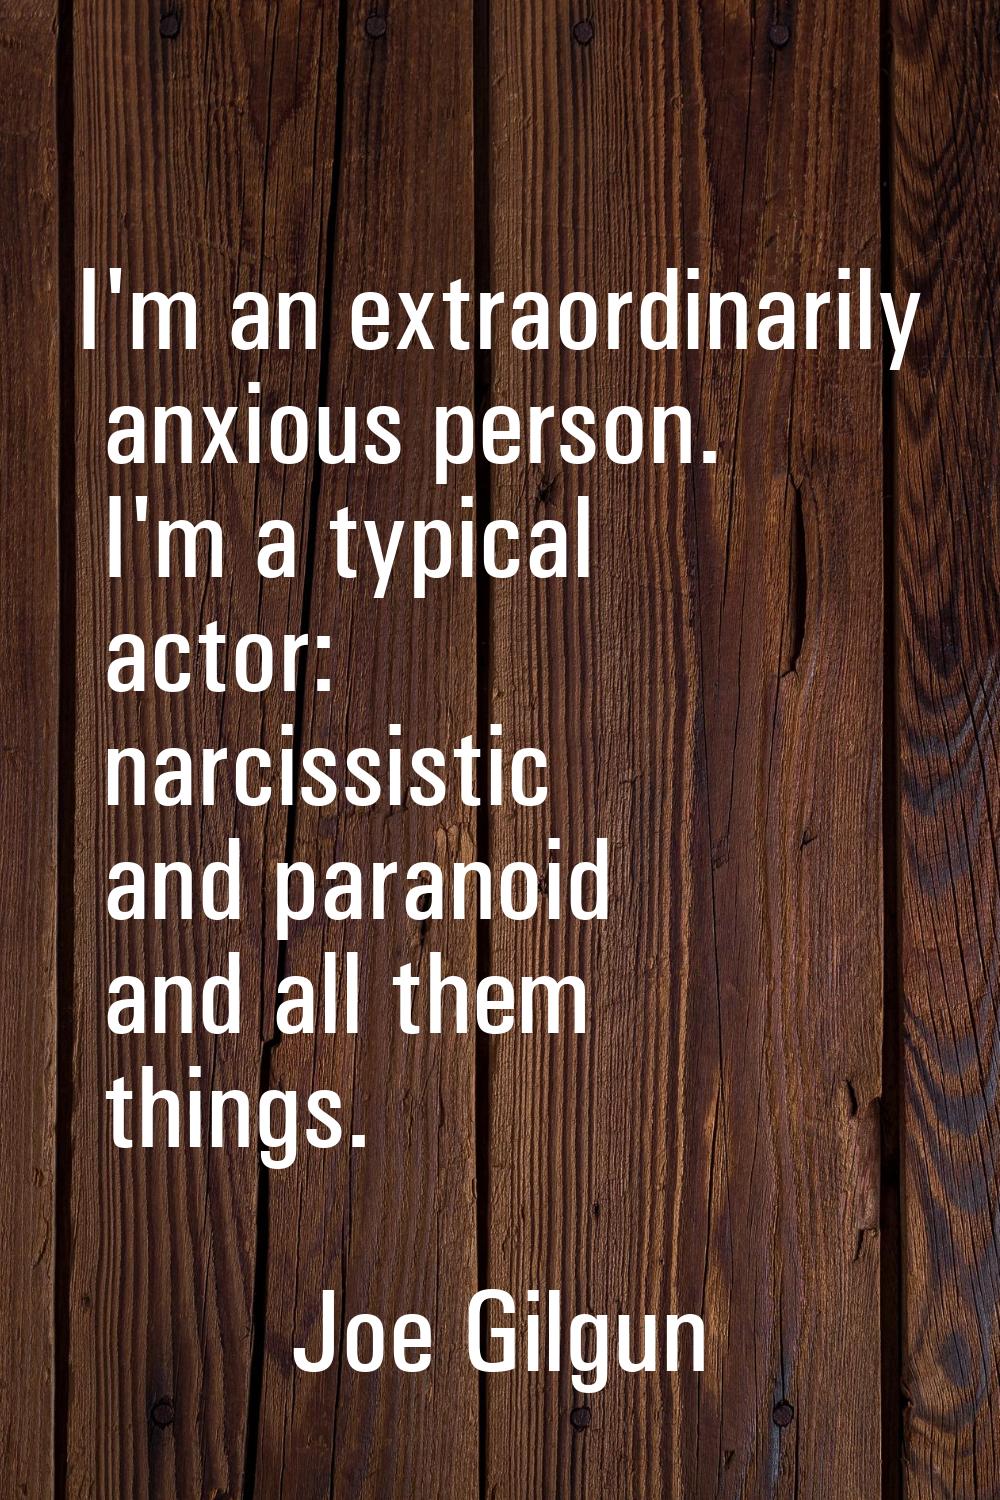 I'm an extraordinarily anxious person. I'm a typical actor: narcissistic and paranoid and all them 